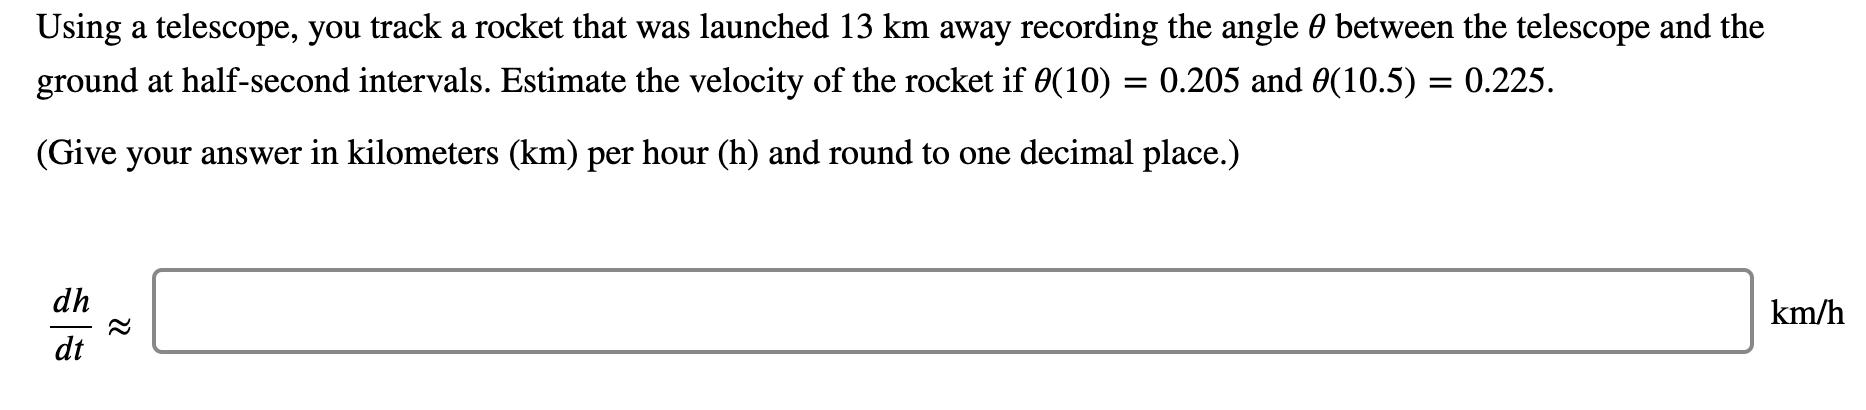 Using a telescope, you track a rocket that was launched 13 km away recording the angle 0 between the telescope and the
ground at half-second intervals. Estimate the velocity of the rocket if 0(10) = 0.205 and 0(10.5) = 0.225.
(Give your answer in kilometers (km) per hour (h) and round to one decimal place.)
dh
km/h
dt
